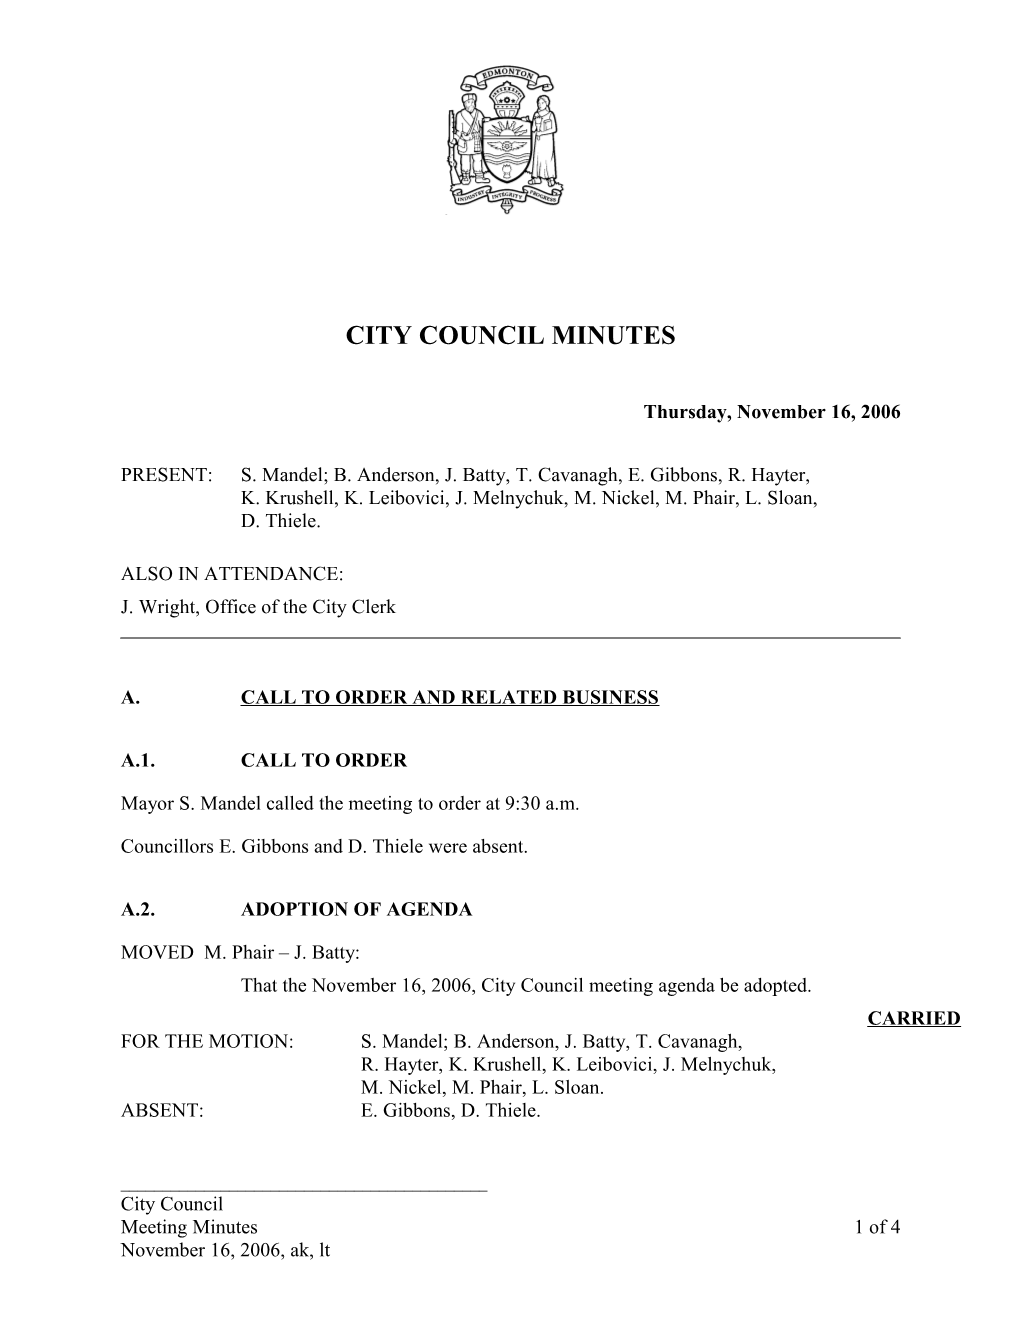 Minutes for City Council November 16, 2006 Meeting